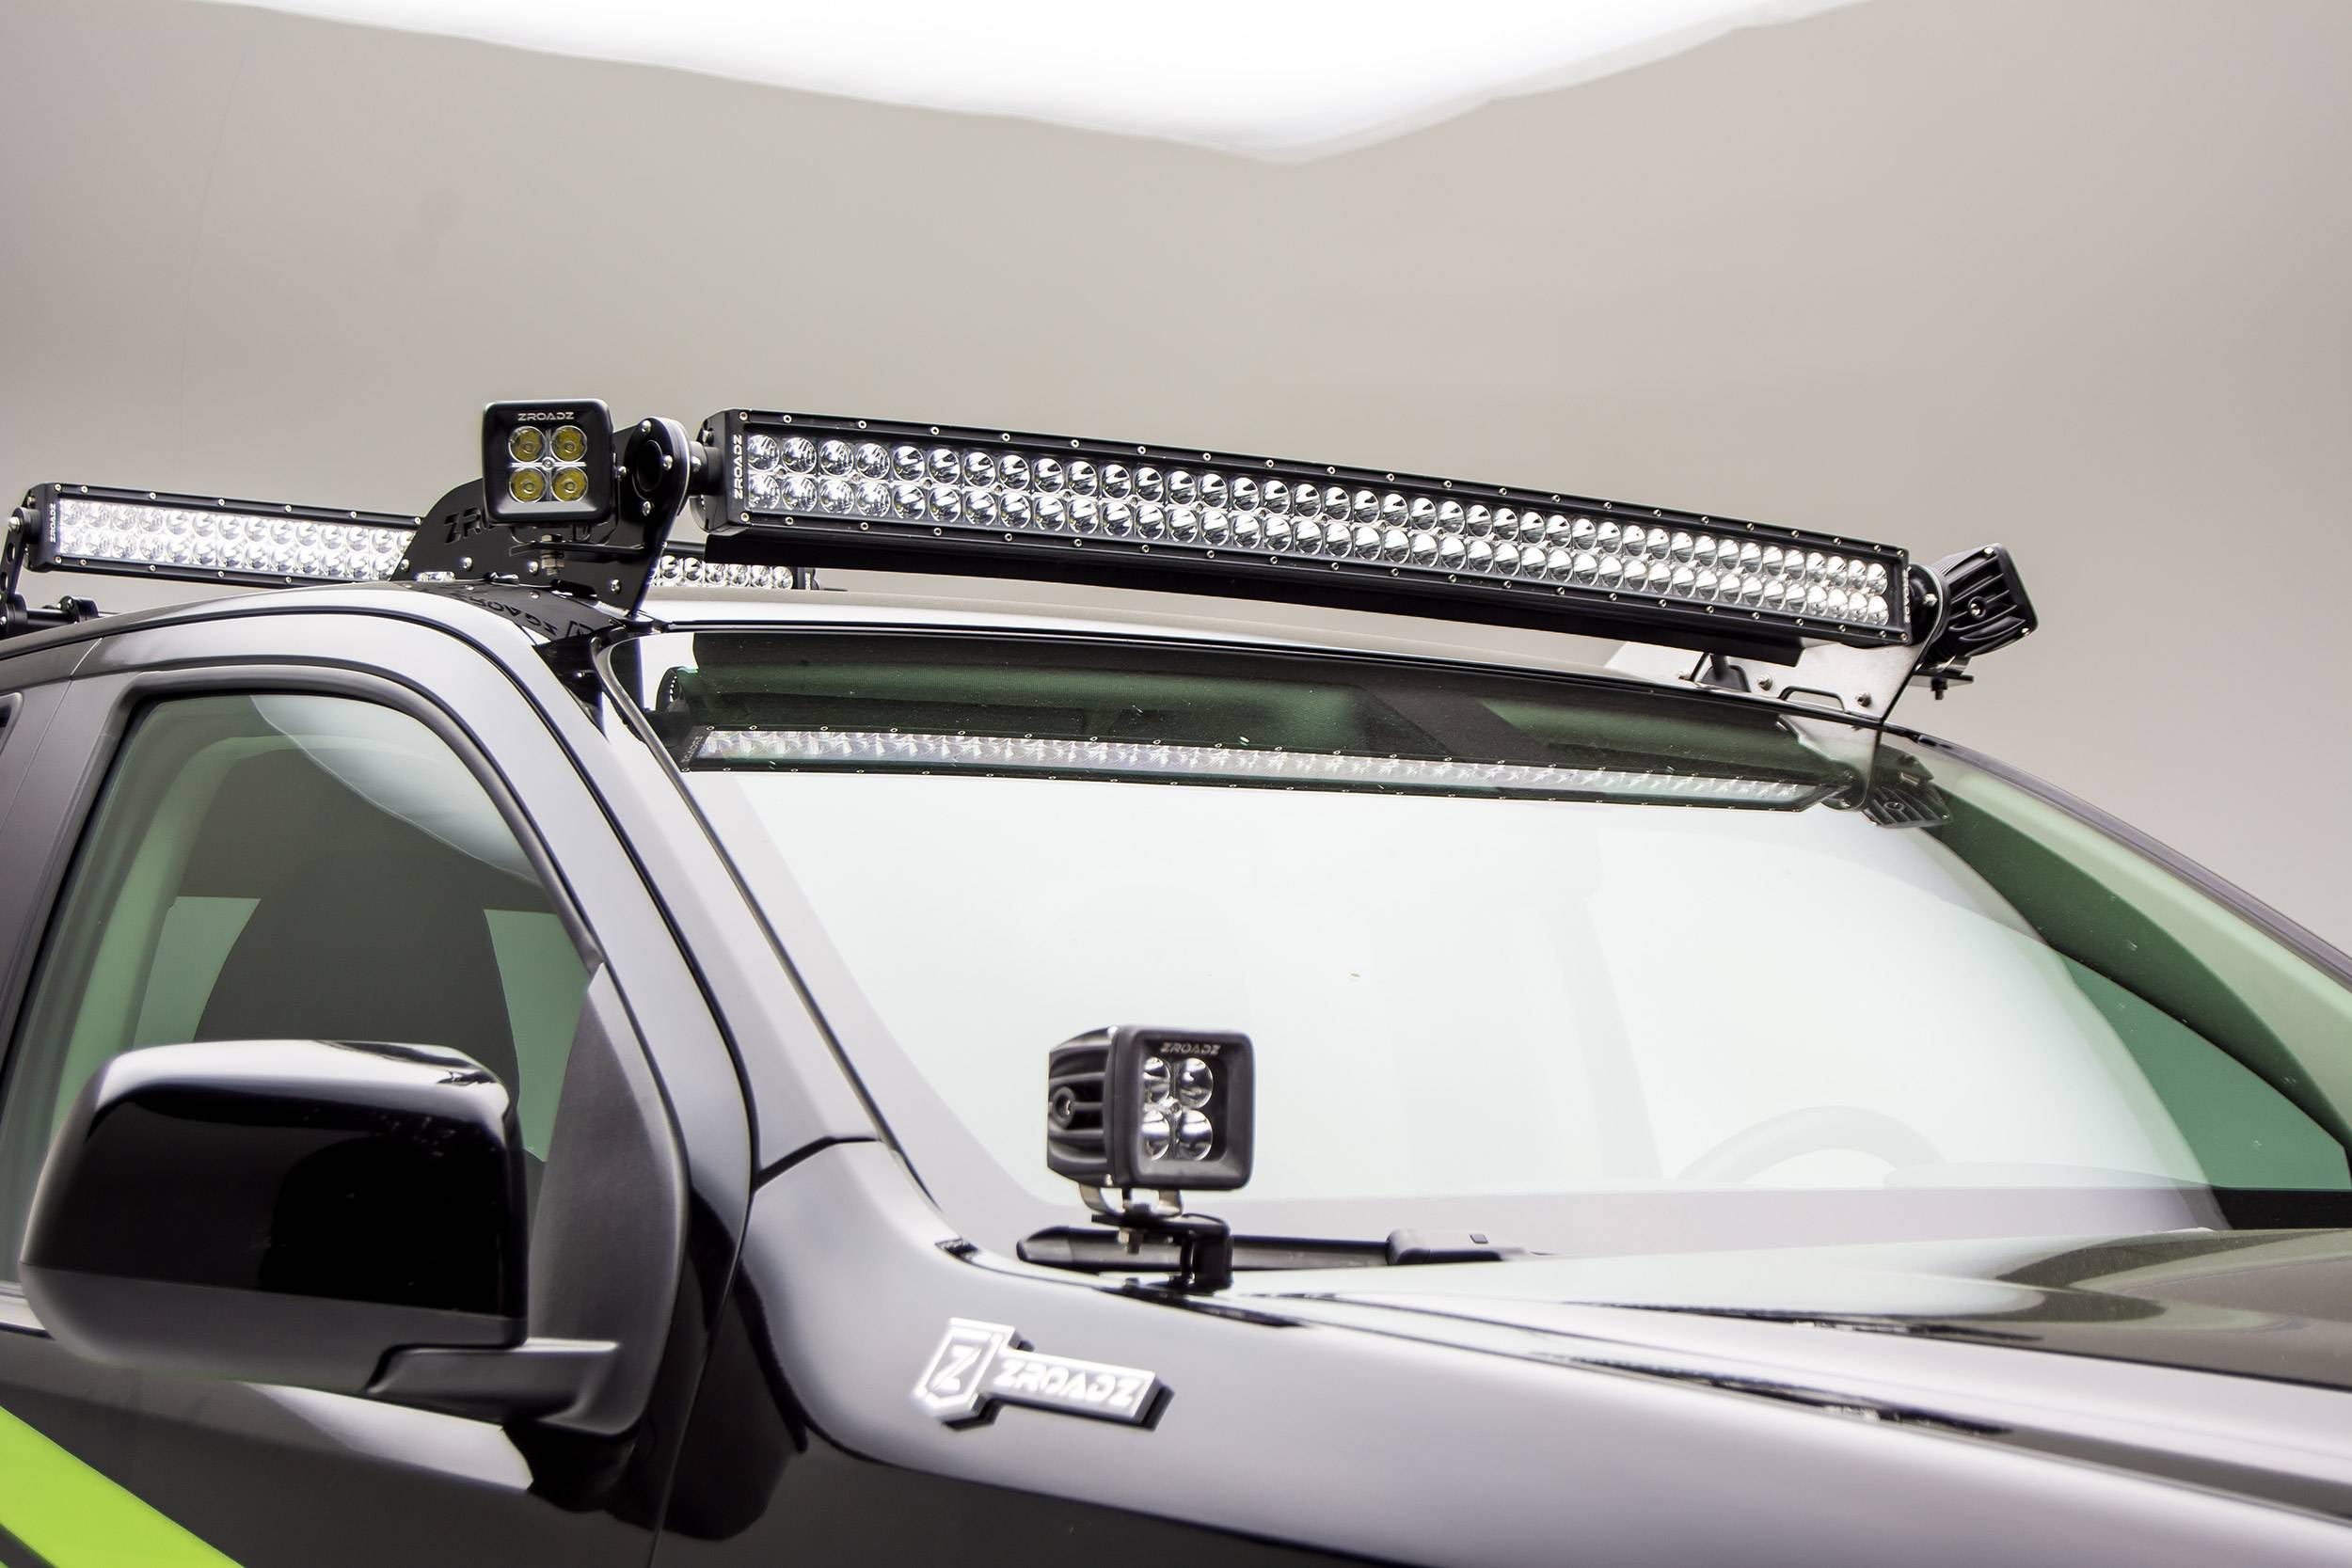 Picture of ZROADZ Z330001 Front Roof Rack Add On Accessories Ft Roof Add Side Led Brackets